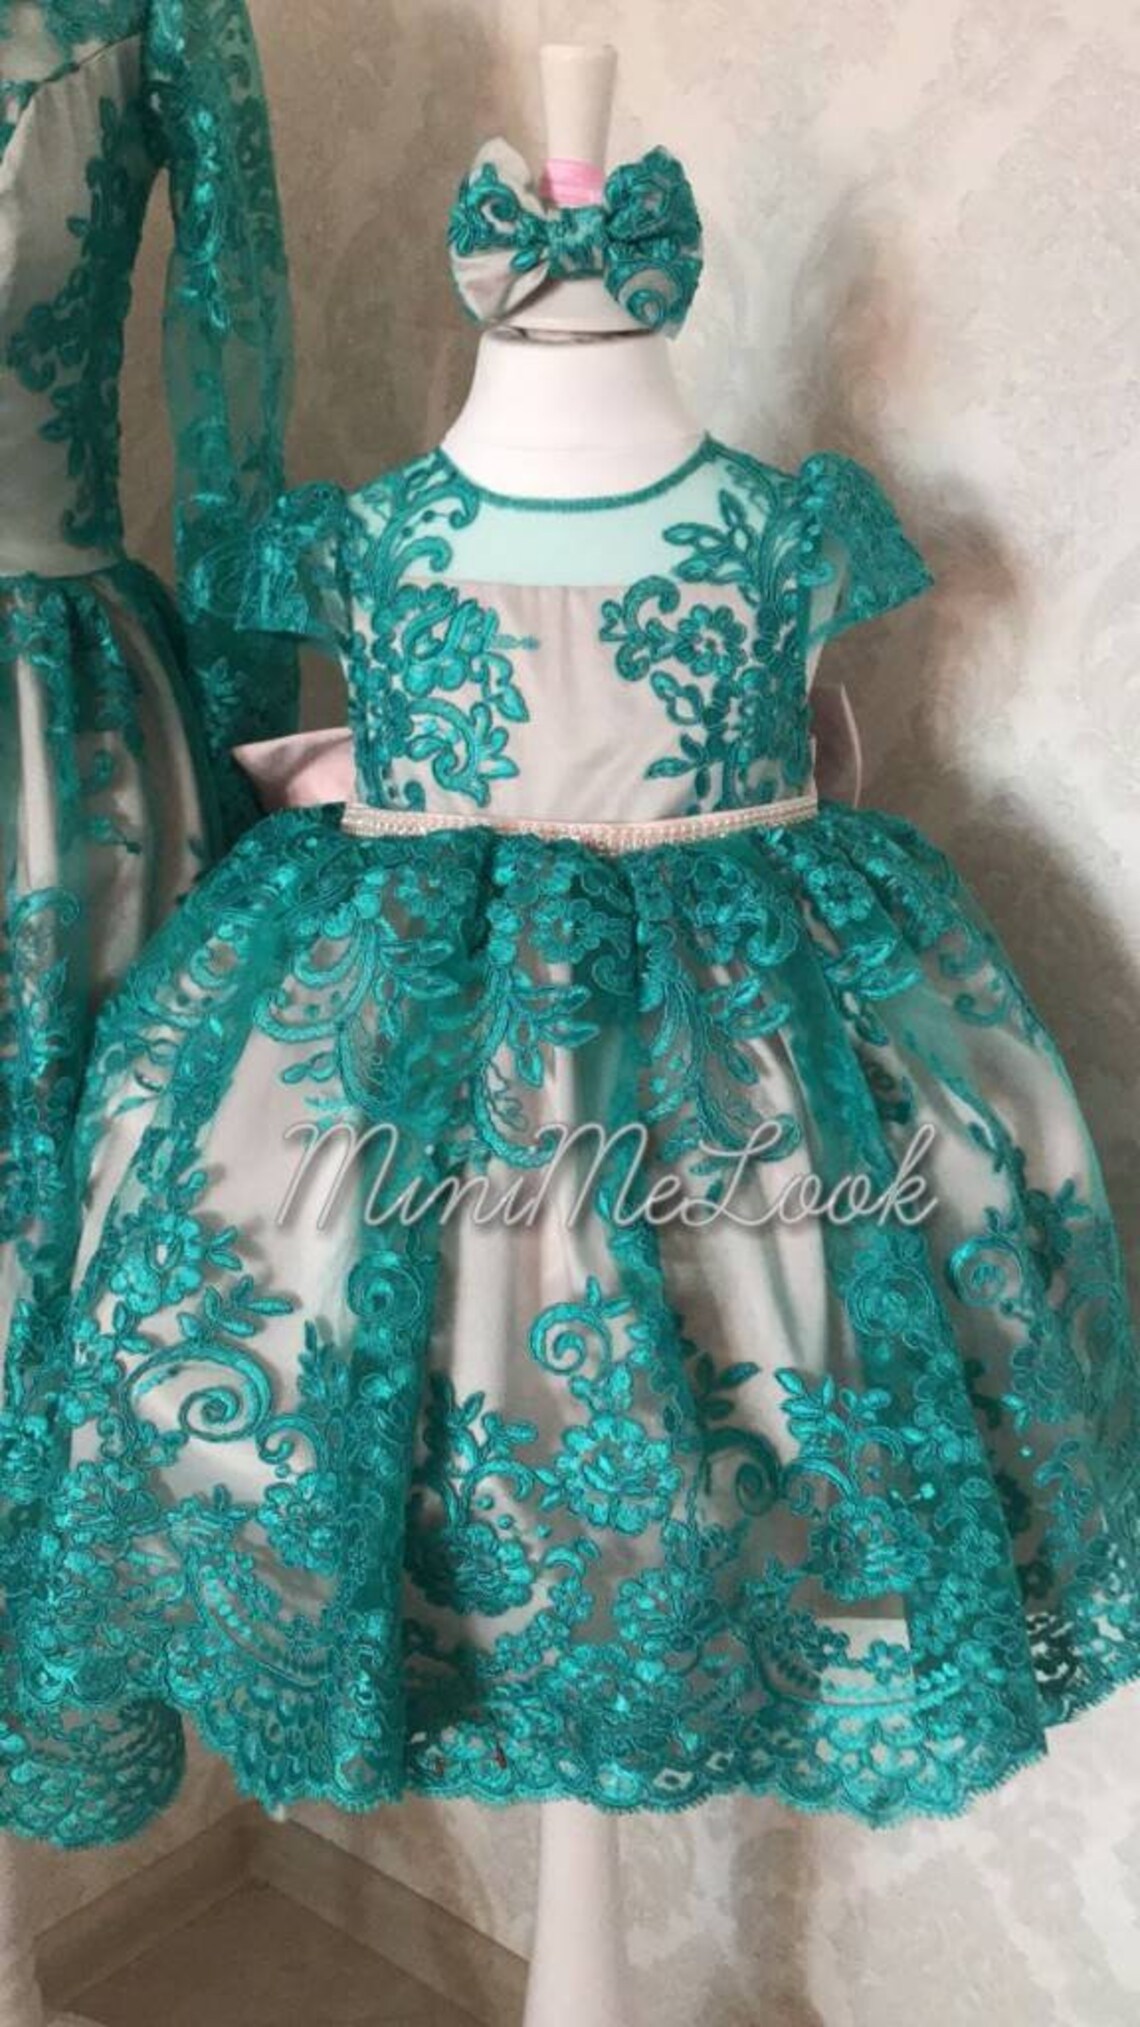 Green Mommy and Me outfits Mother daughter matching dress | Etsy